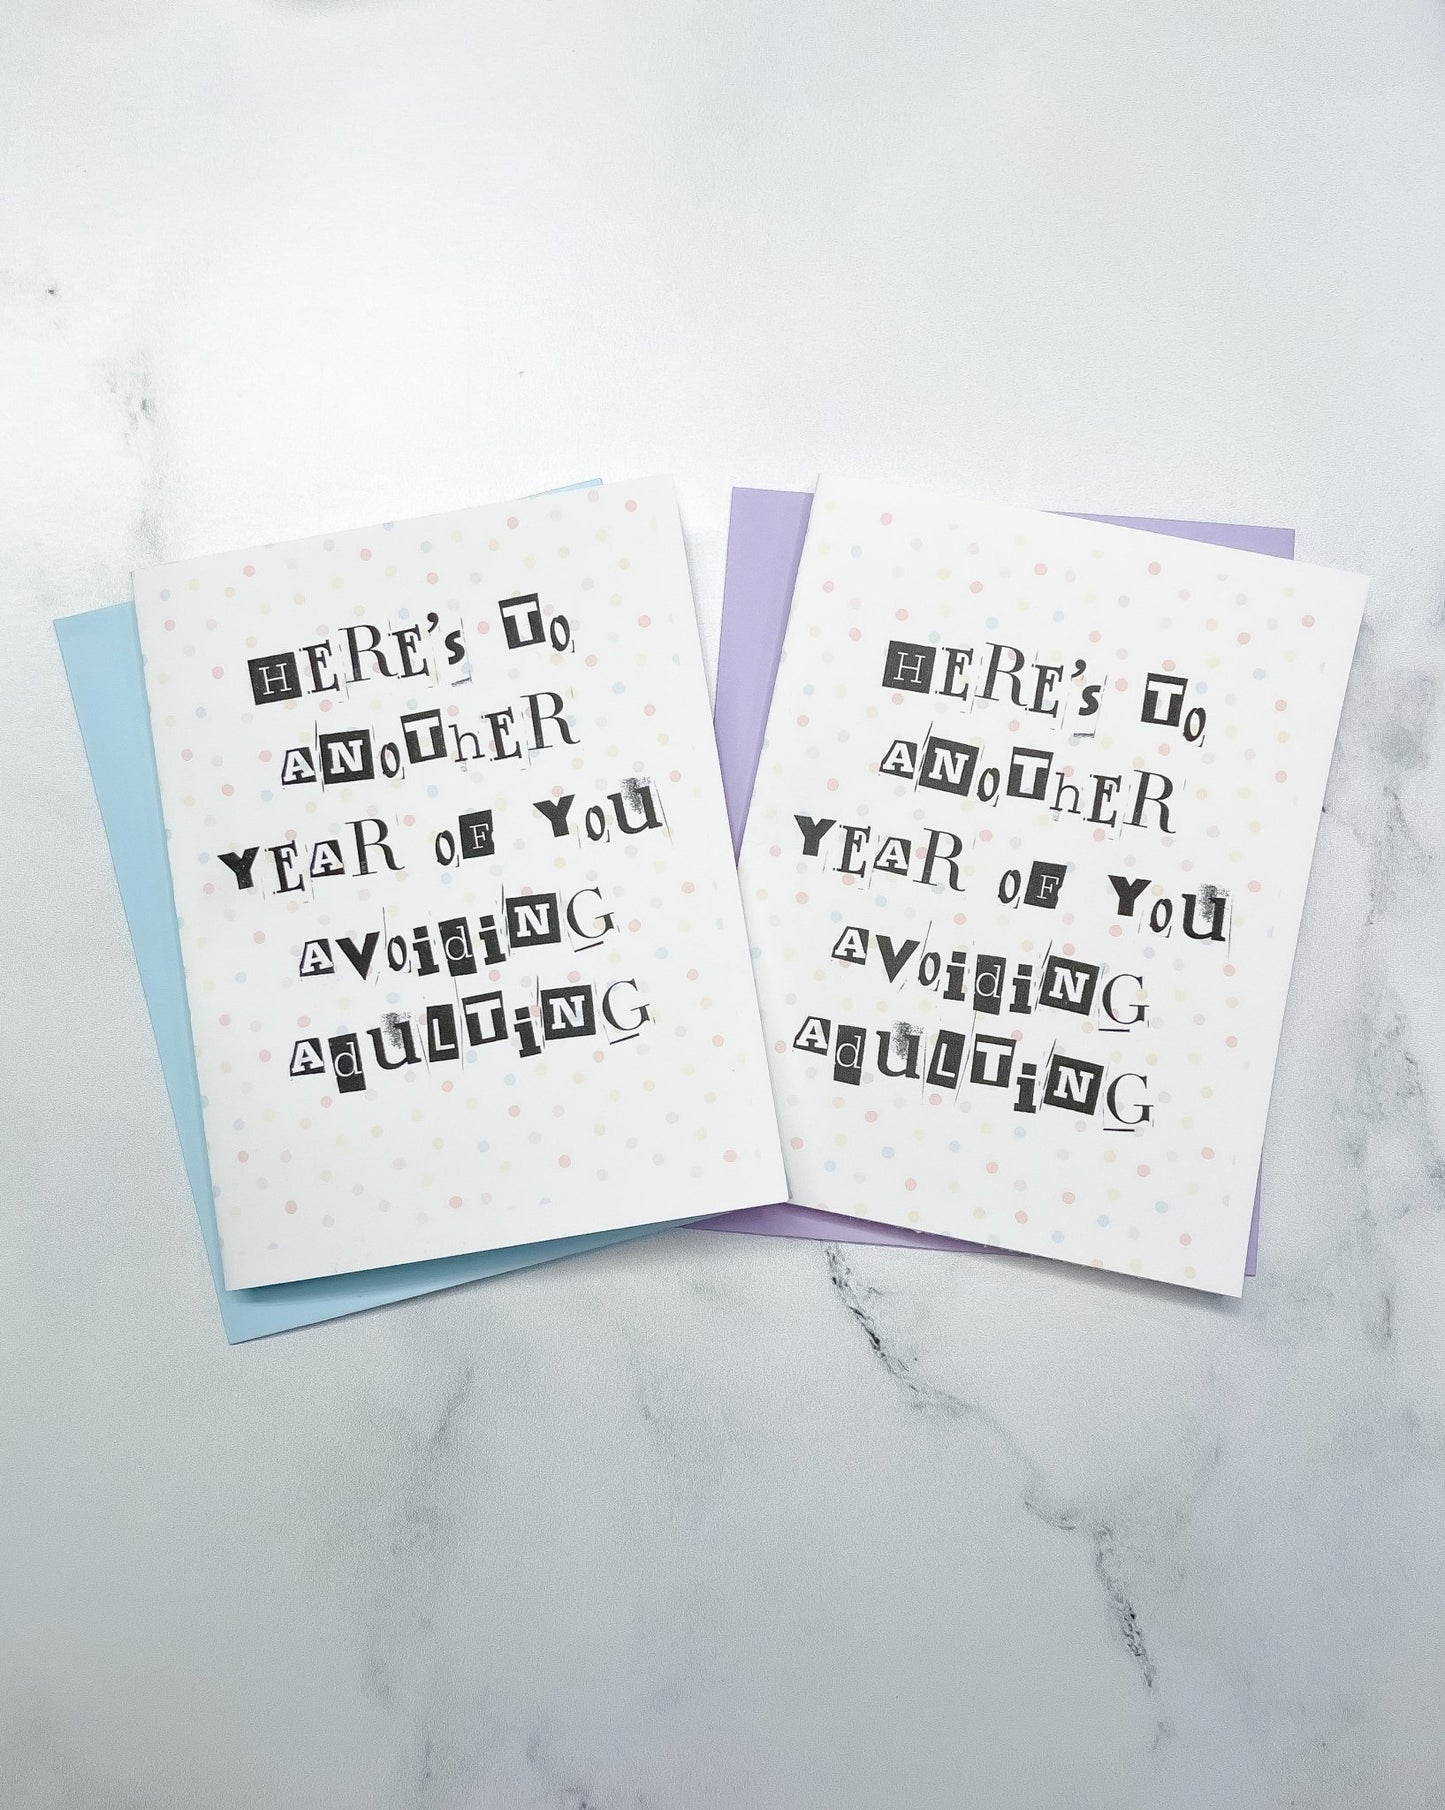 Adulting Greeting Card - Designs by Lauren Ann